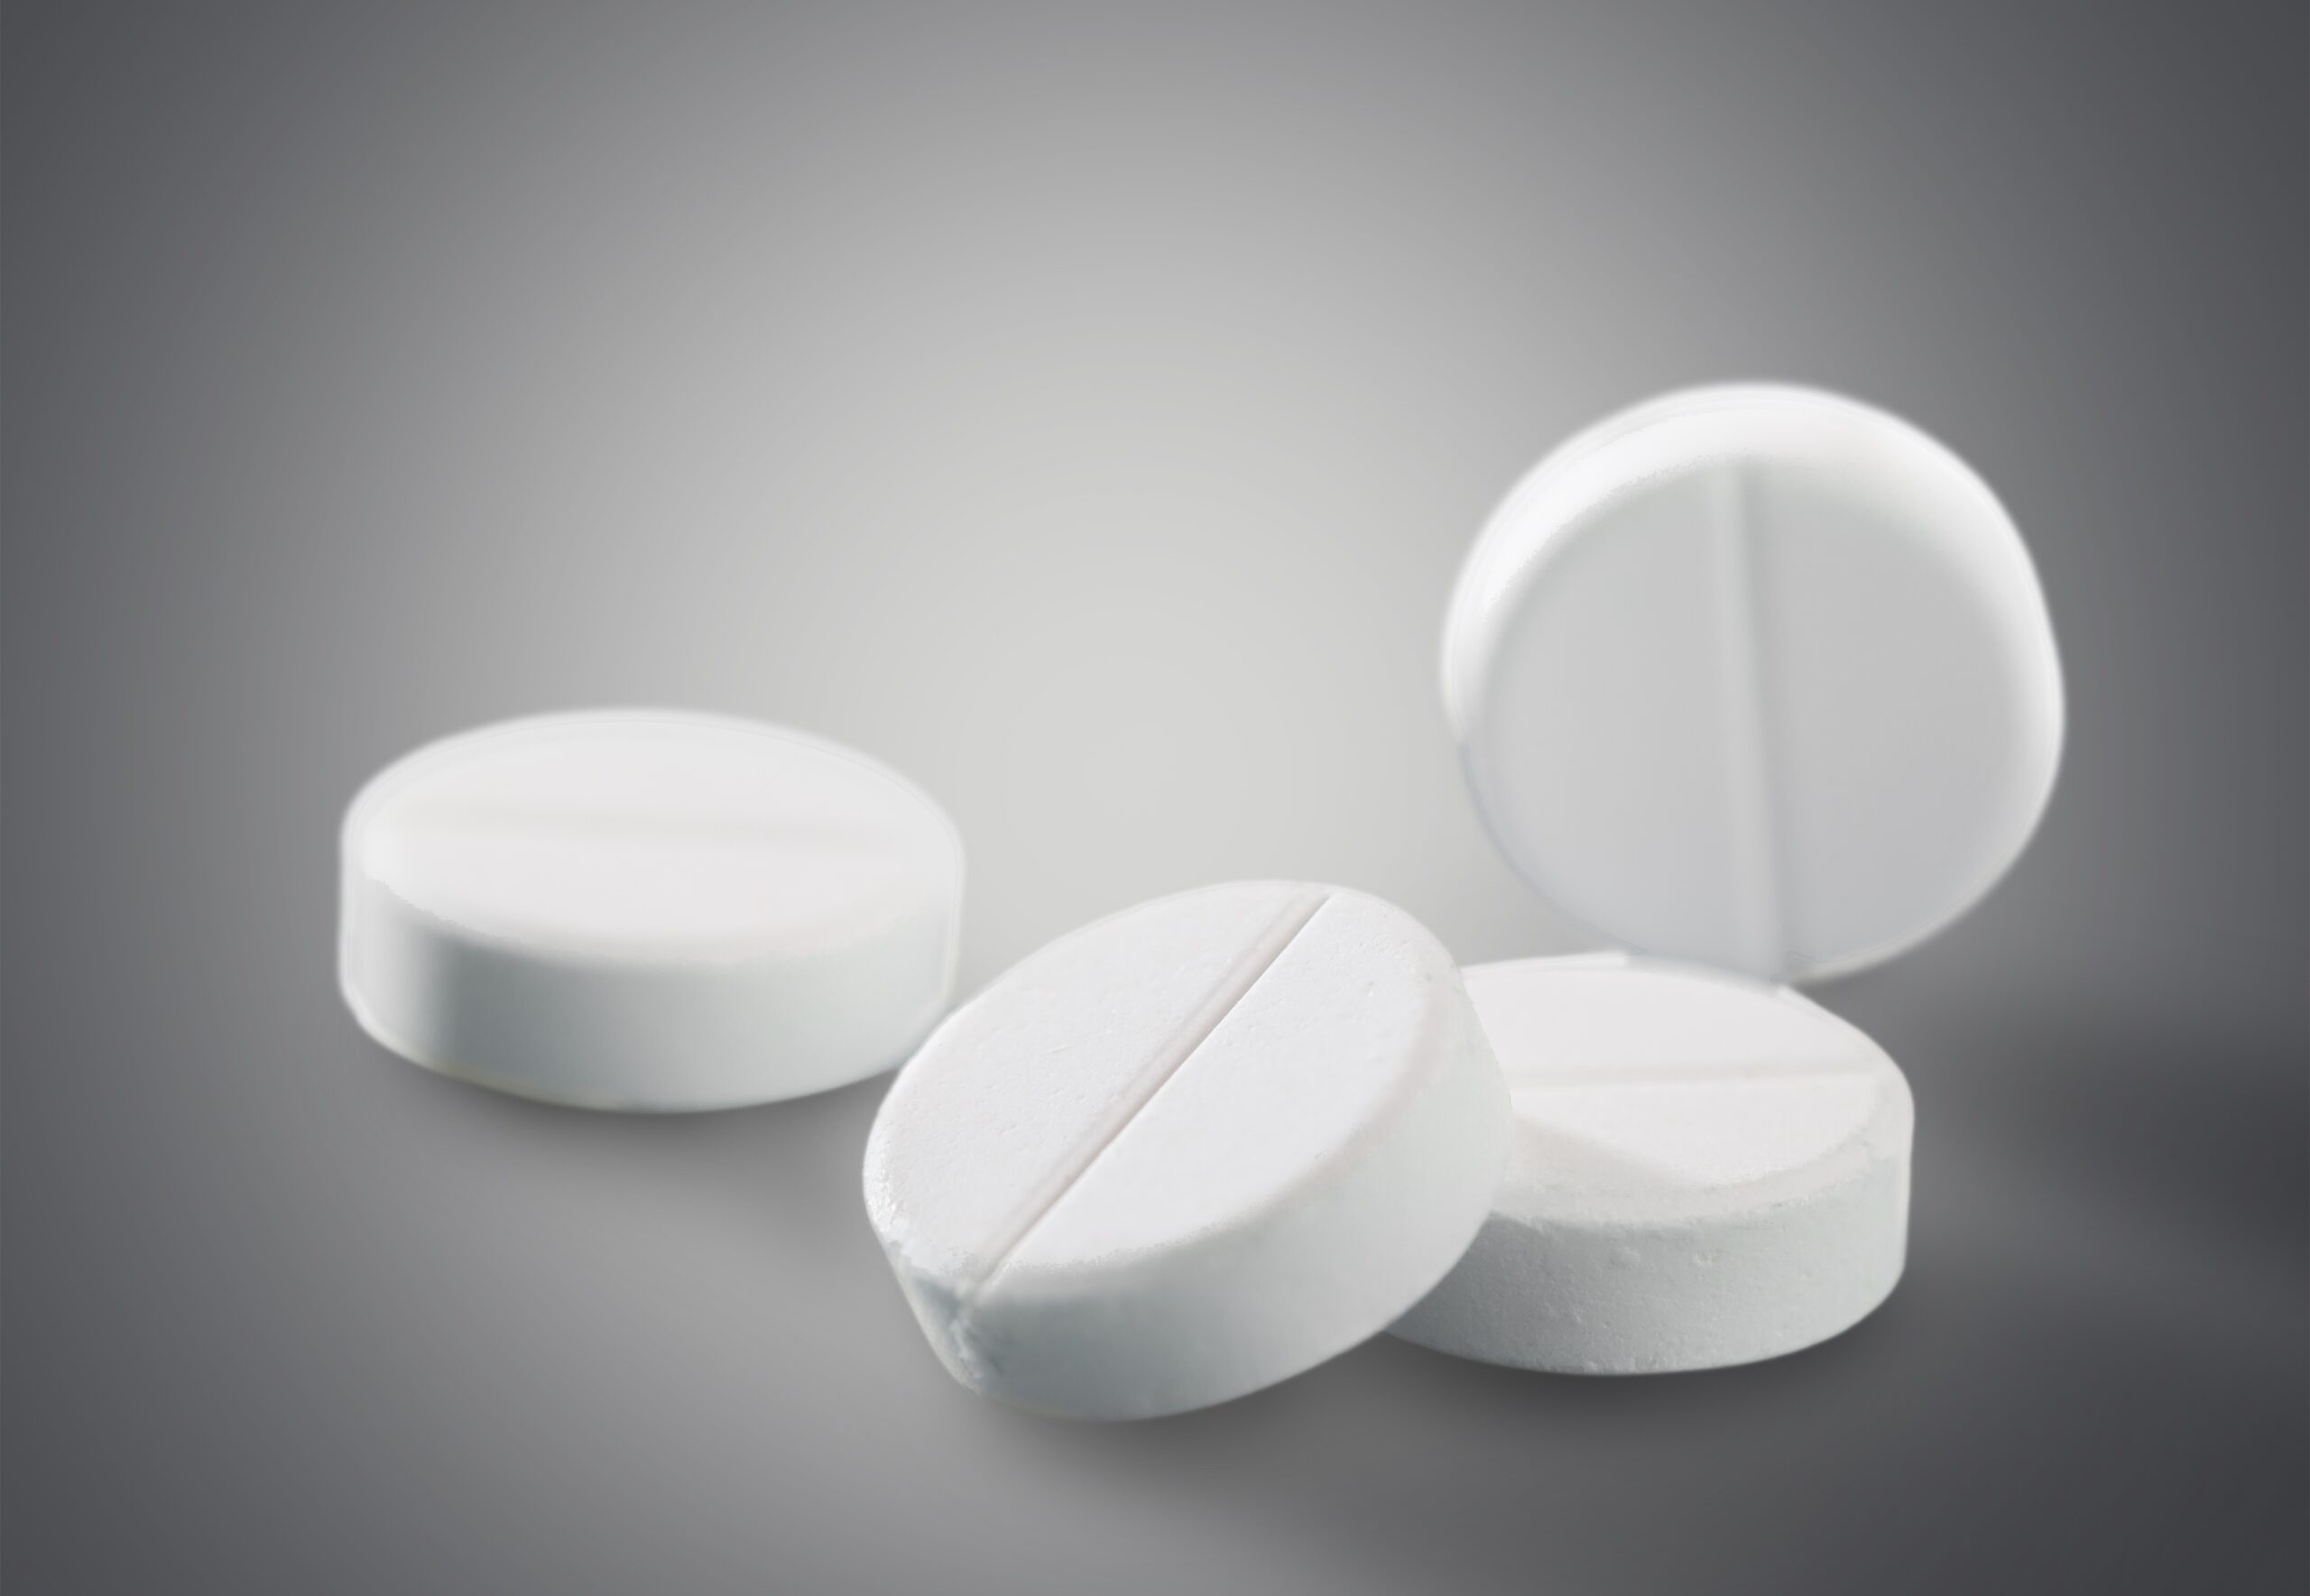 Low doses of aspirin can reduce risk of diabetes